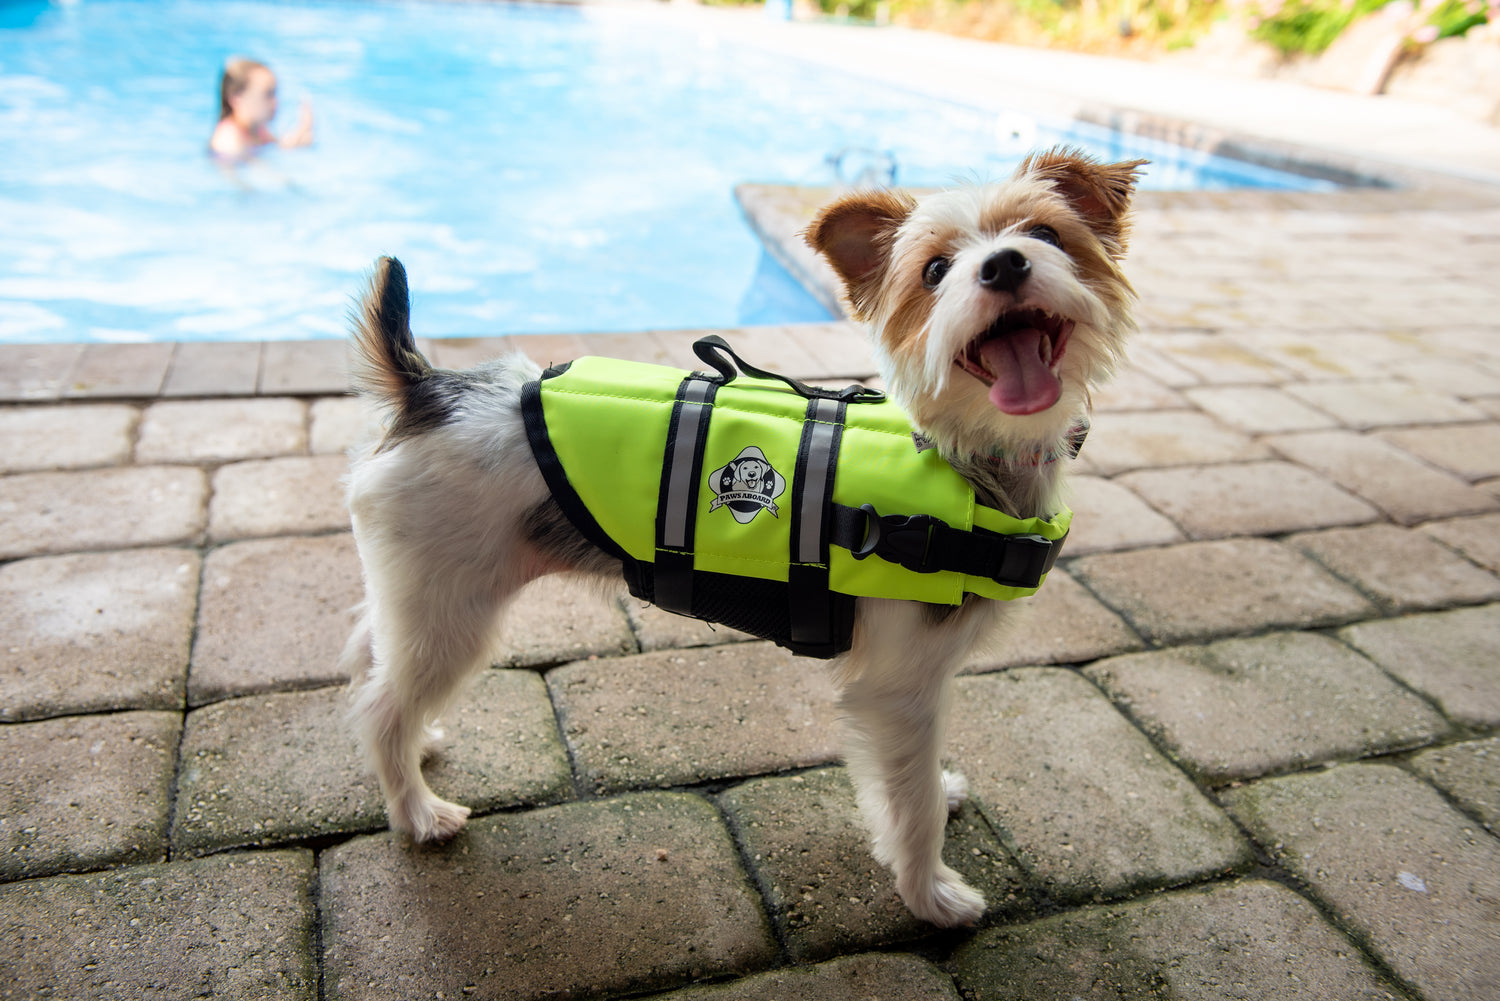 Bright-eyed Yorkie dog poolside wearing a high visibility yellow Paws Aboard dog life jacket.